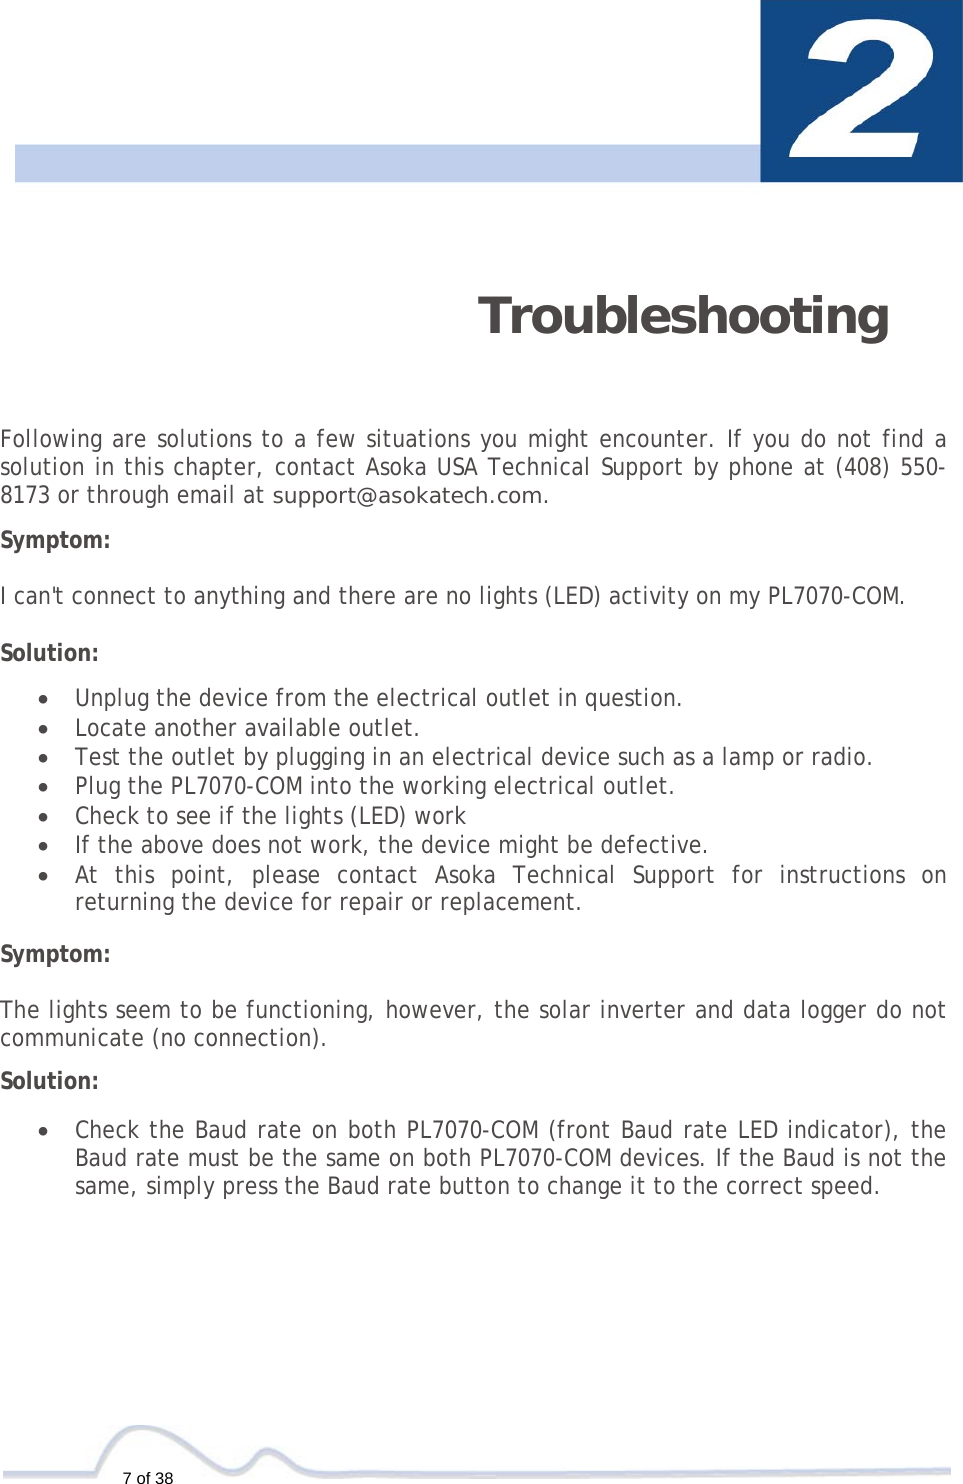  7 of 38   Troubleshooting   Following are solutions to a few situations you might encounter. If you do not find a solution in this chapter, contact Asoka USA Technical Support by phone at (408) 550-8173 or through email at support@asokatech.com.  Symptom:   I can&apos;t connect to anything and there are no lights (LED) activity on my PL7070-COM.  Solution:  • Unplug the device from the electrical outlet in question. • Locate another available outlet. • Test the outlet by plugging in an electrical device such as a lamp or radio. • Plug the PL7070-COM into the working electrical outlet. • Check to see if the lights (LED) work • If the above does not work, the device might be defective. • At this point, please contact Asoka Technical Support for instructions on returning the device for repair or replacement.  Symptom:   The lights seem to be functioning, however, the solar inverter and data logger do not communicate (no connection).  Solution:  • Check the Baud rate on both PL7070-COM (front Baud rate LED indicator), the Baud rate must be the same on both PL7070-COM devices. If the Baud is not the same, simply press the Baud rate button to change it to the correct speed.